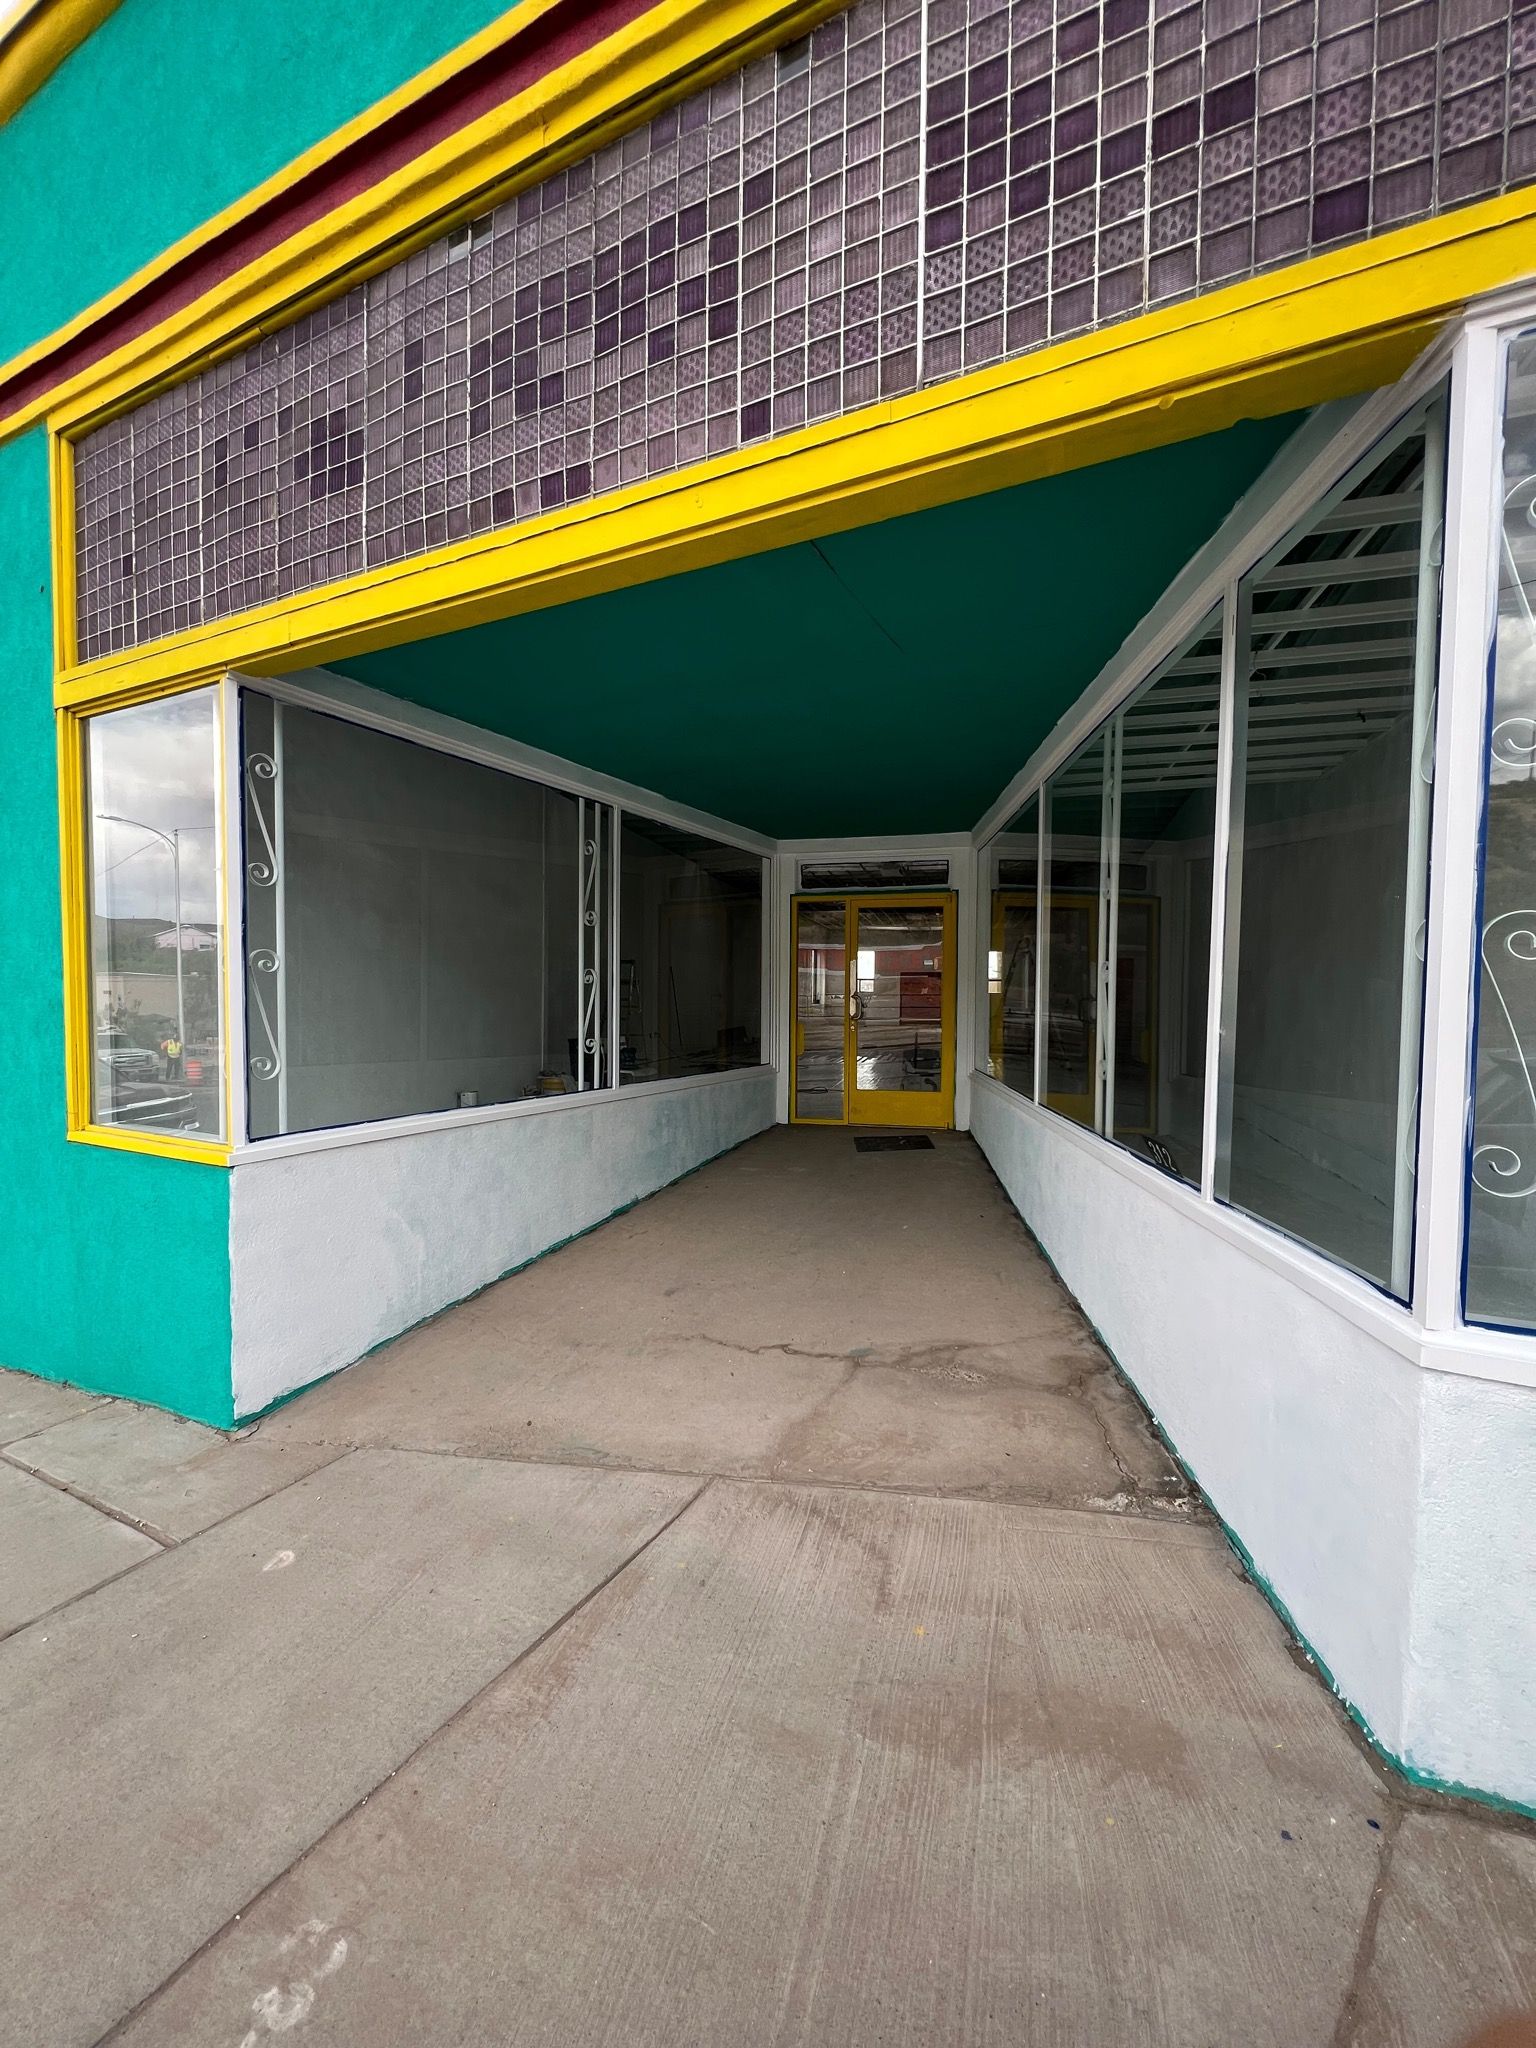 A long glass lined entry way to a building is freshly painted white over the existing teal.